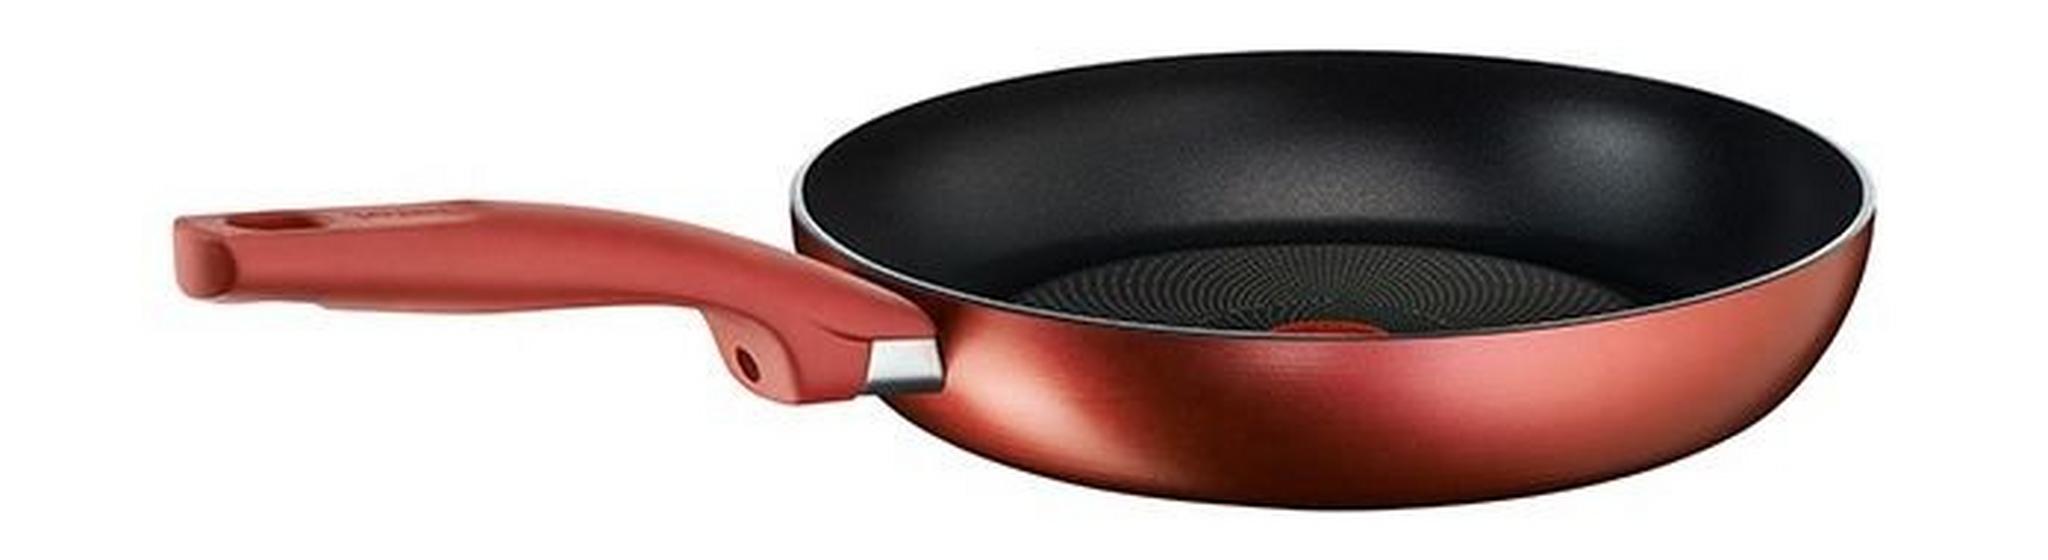 Tefal 28cm Character Frypan - Red